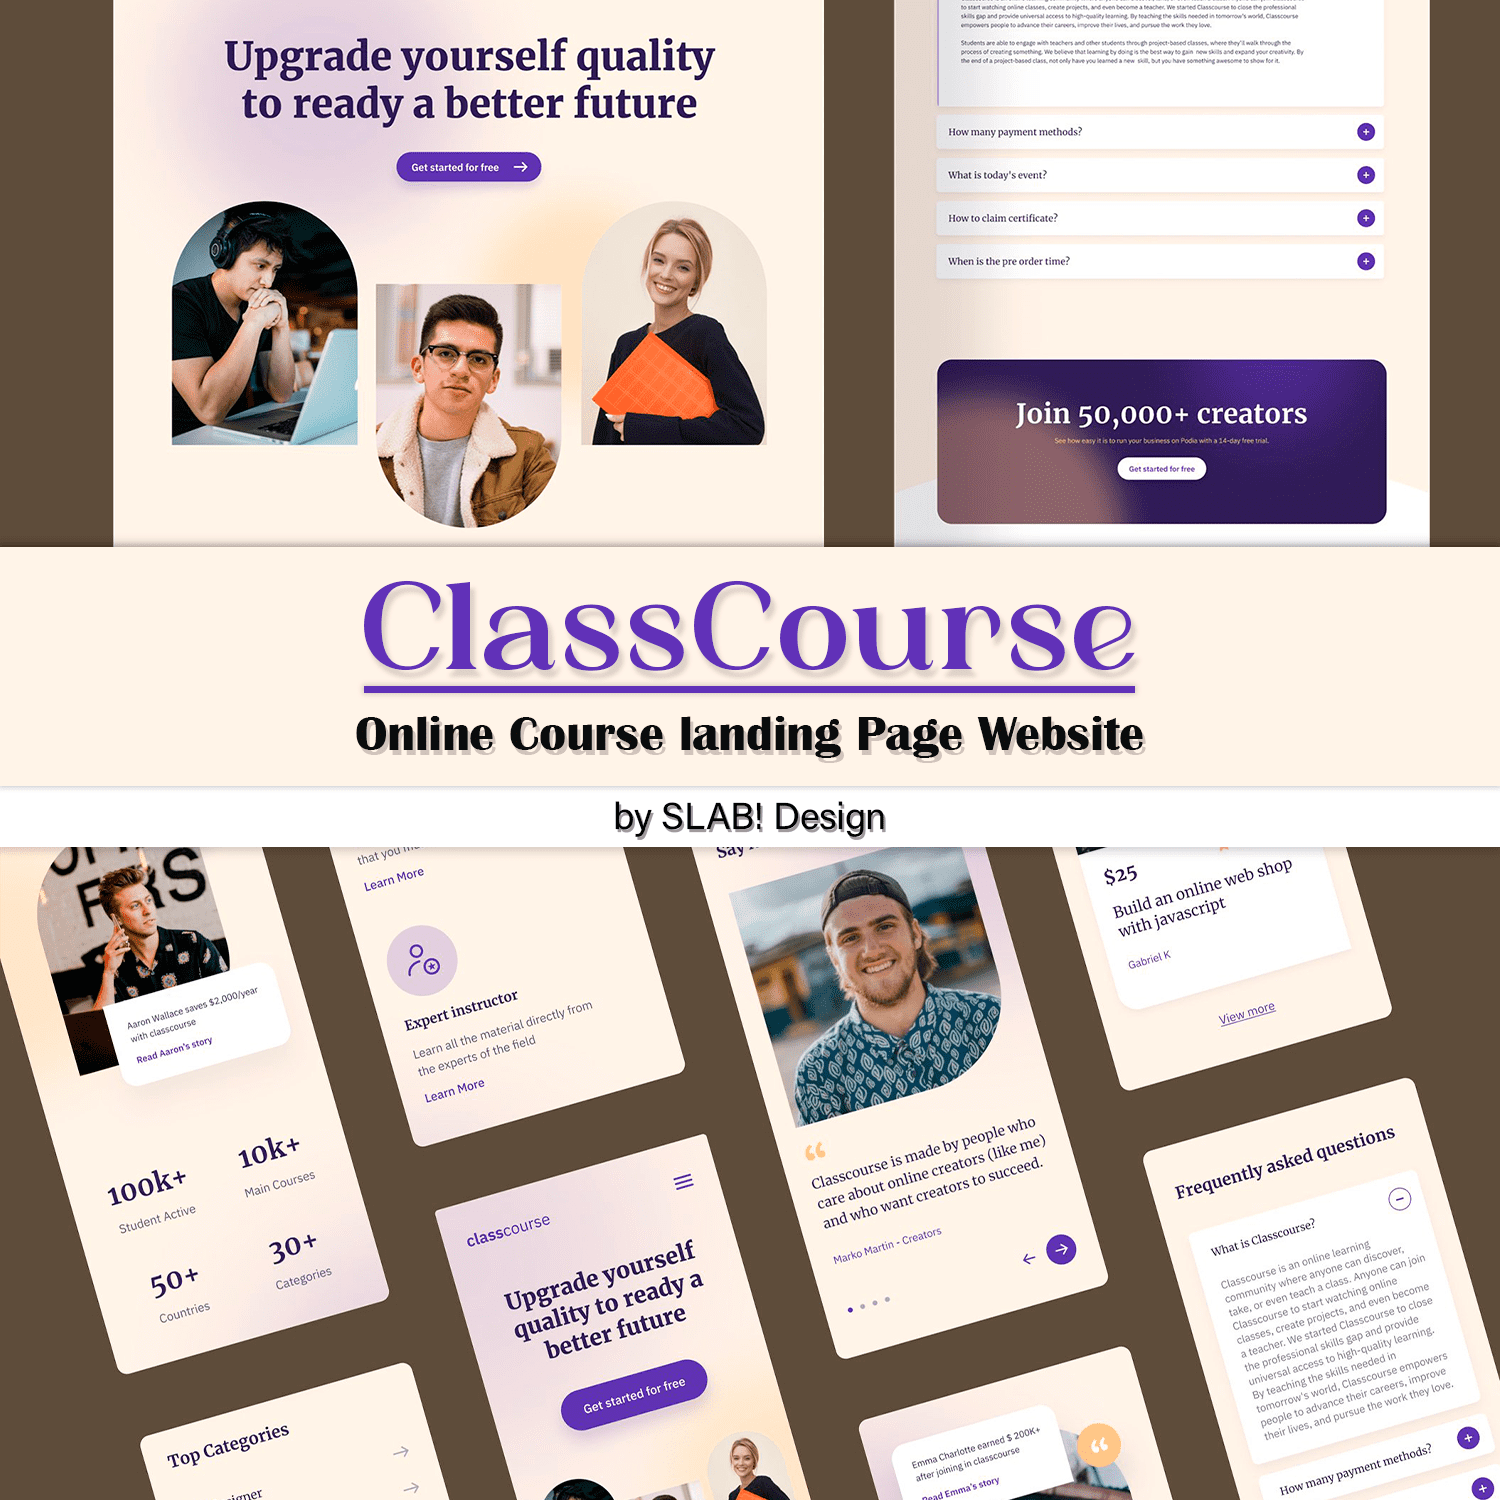 Online Course landing Page Website cover.